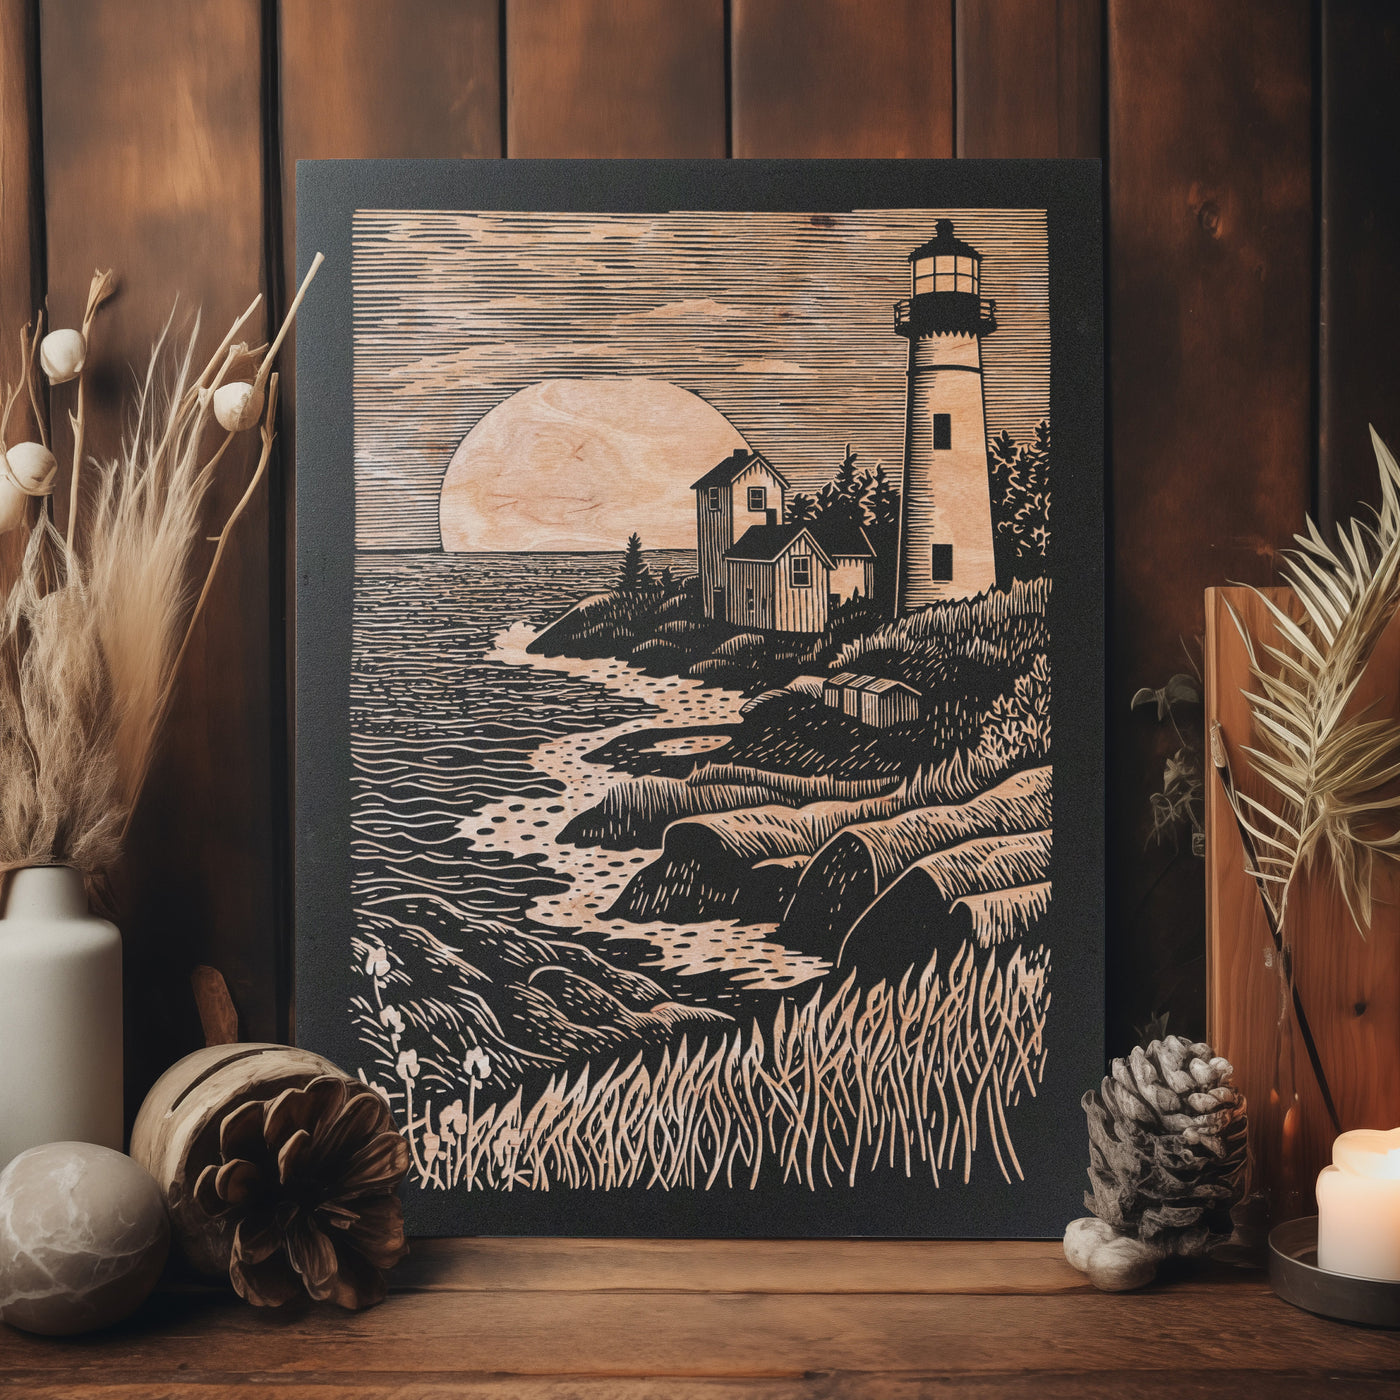 Lighthouse Engraved Wood Panel | Block Print Inspired Nautical Wall Art, Boating Illustration Cottage Home Decor, Beach House Print Gift